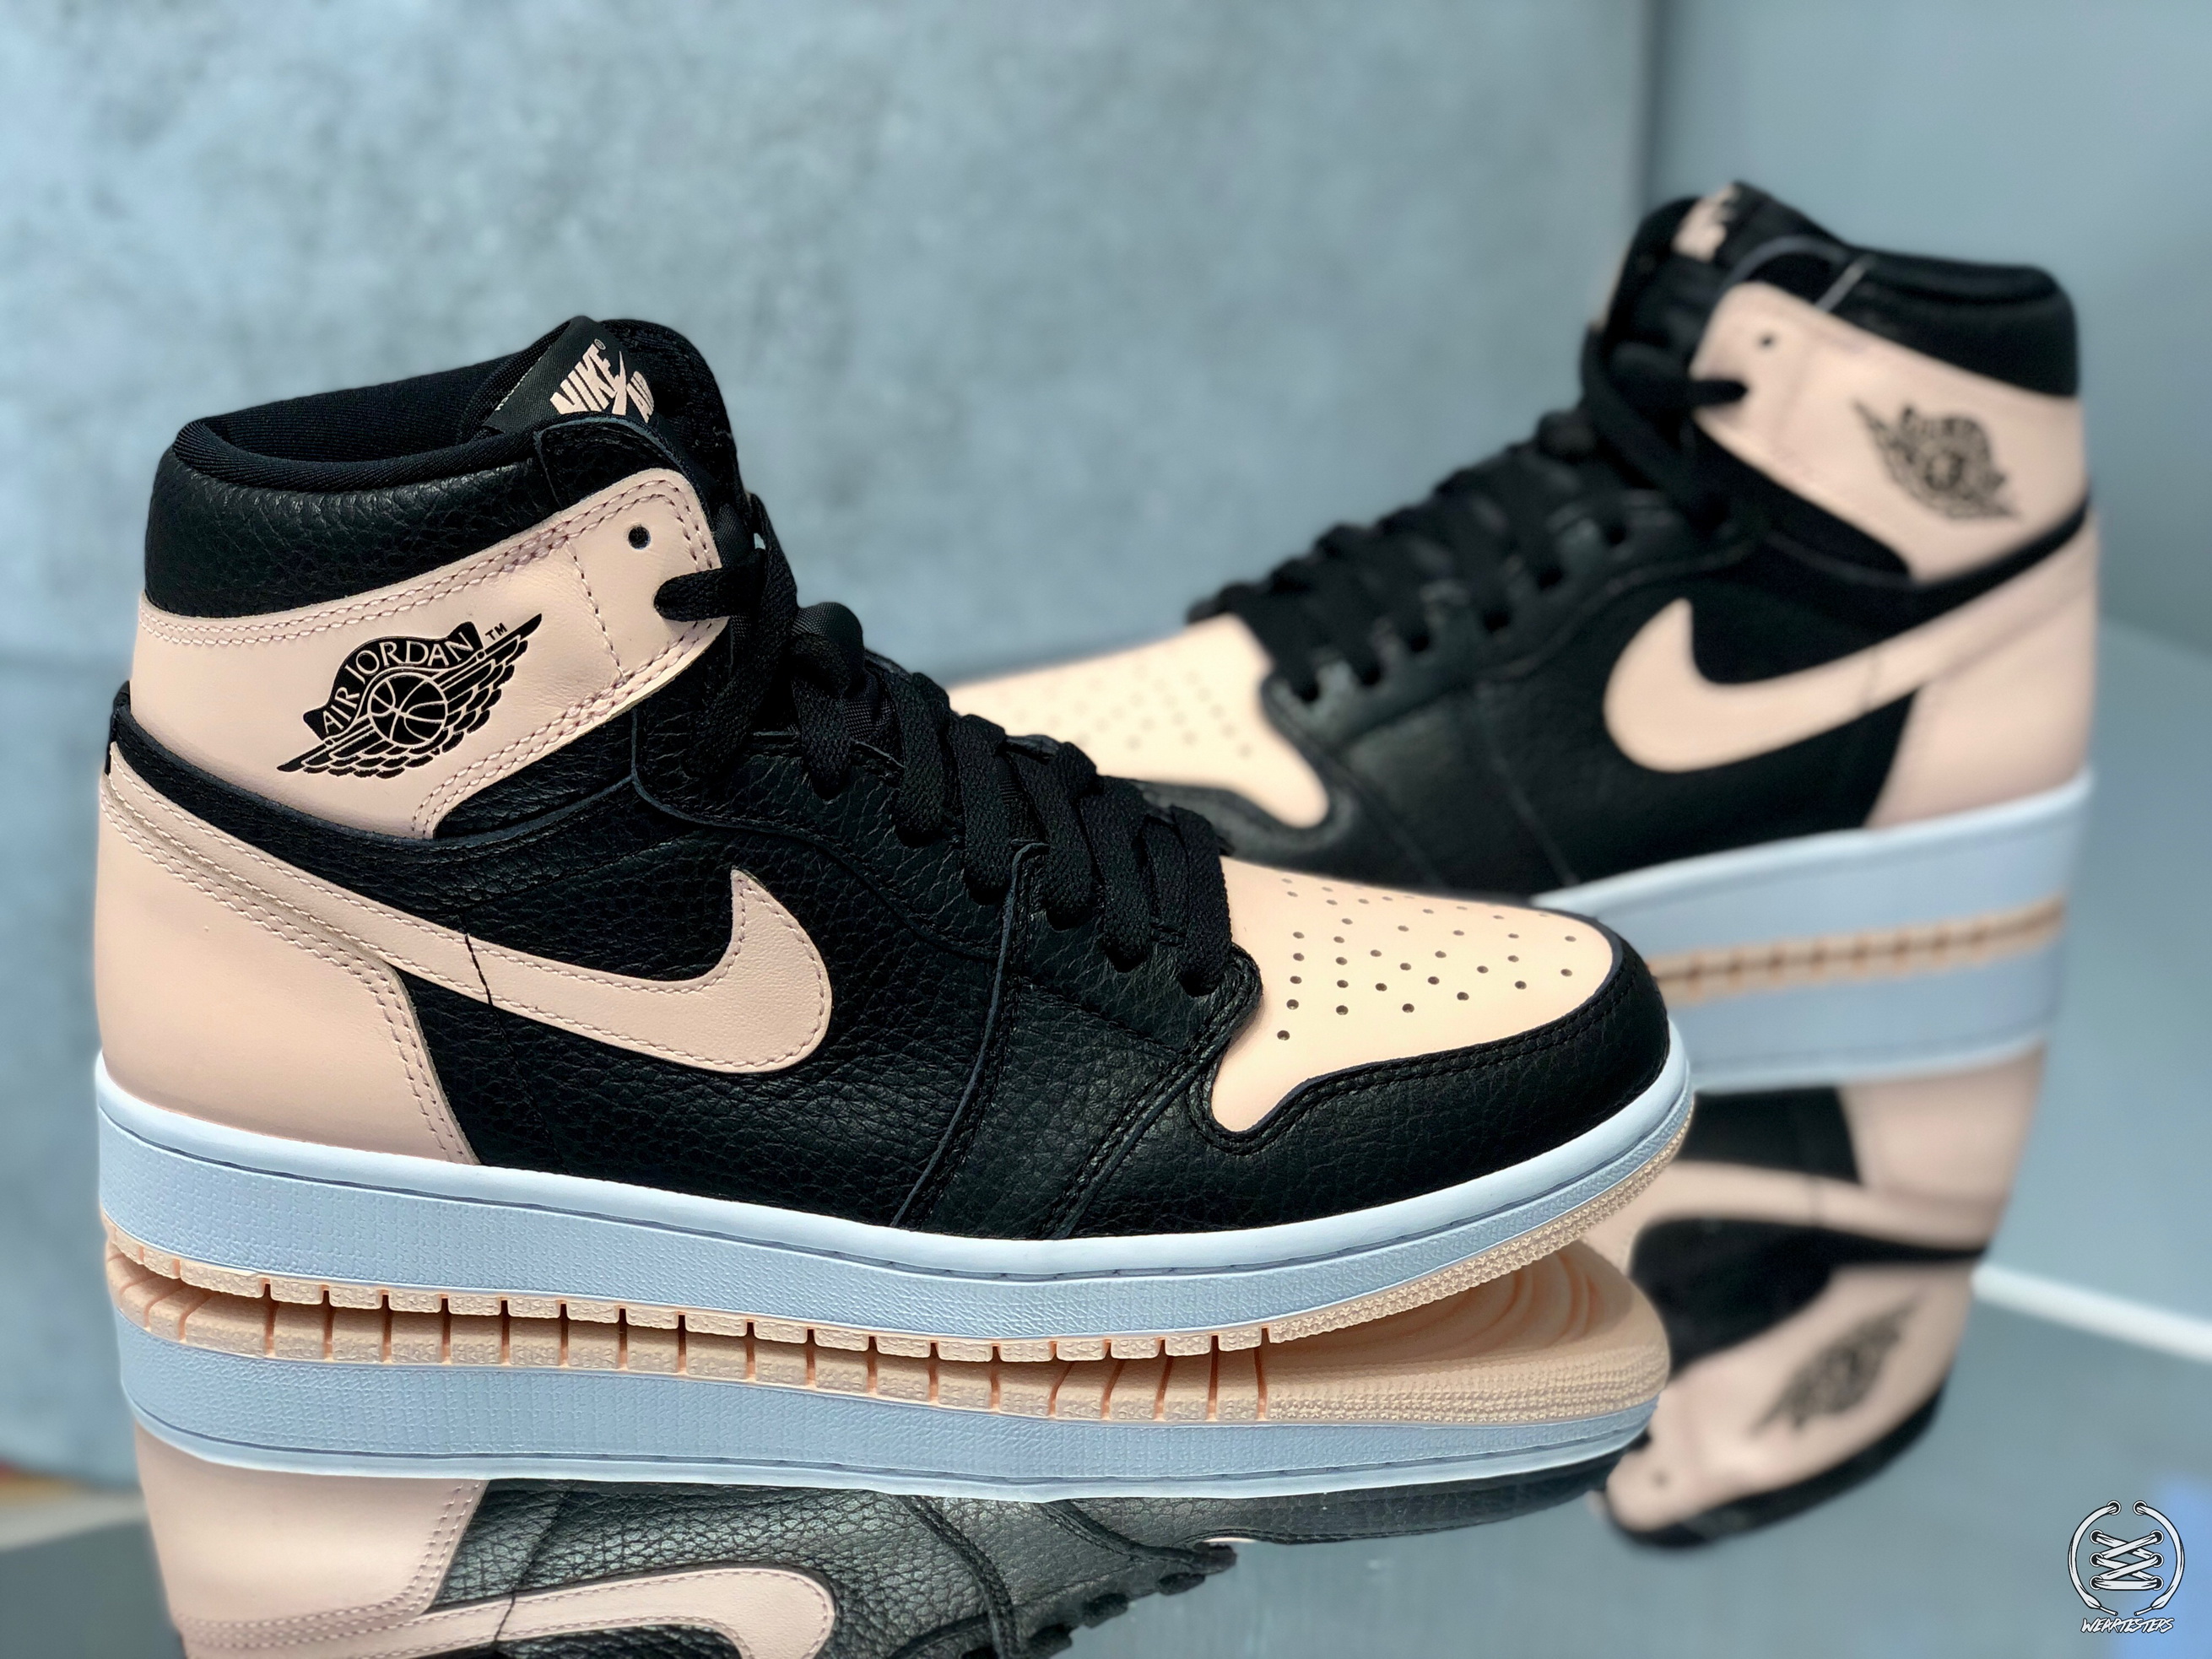 The Air Jordan 1 OG High to Release in 'Crimson Tint' - WearTesters